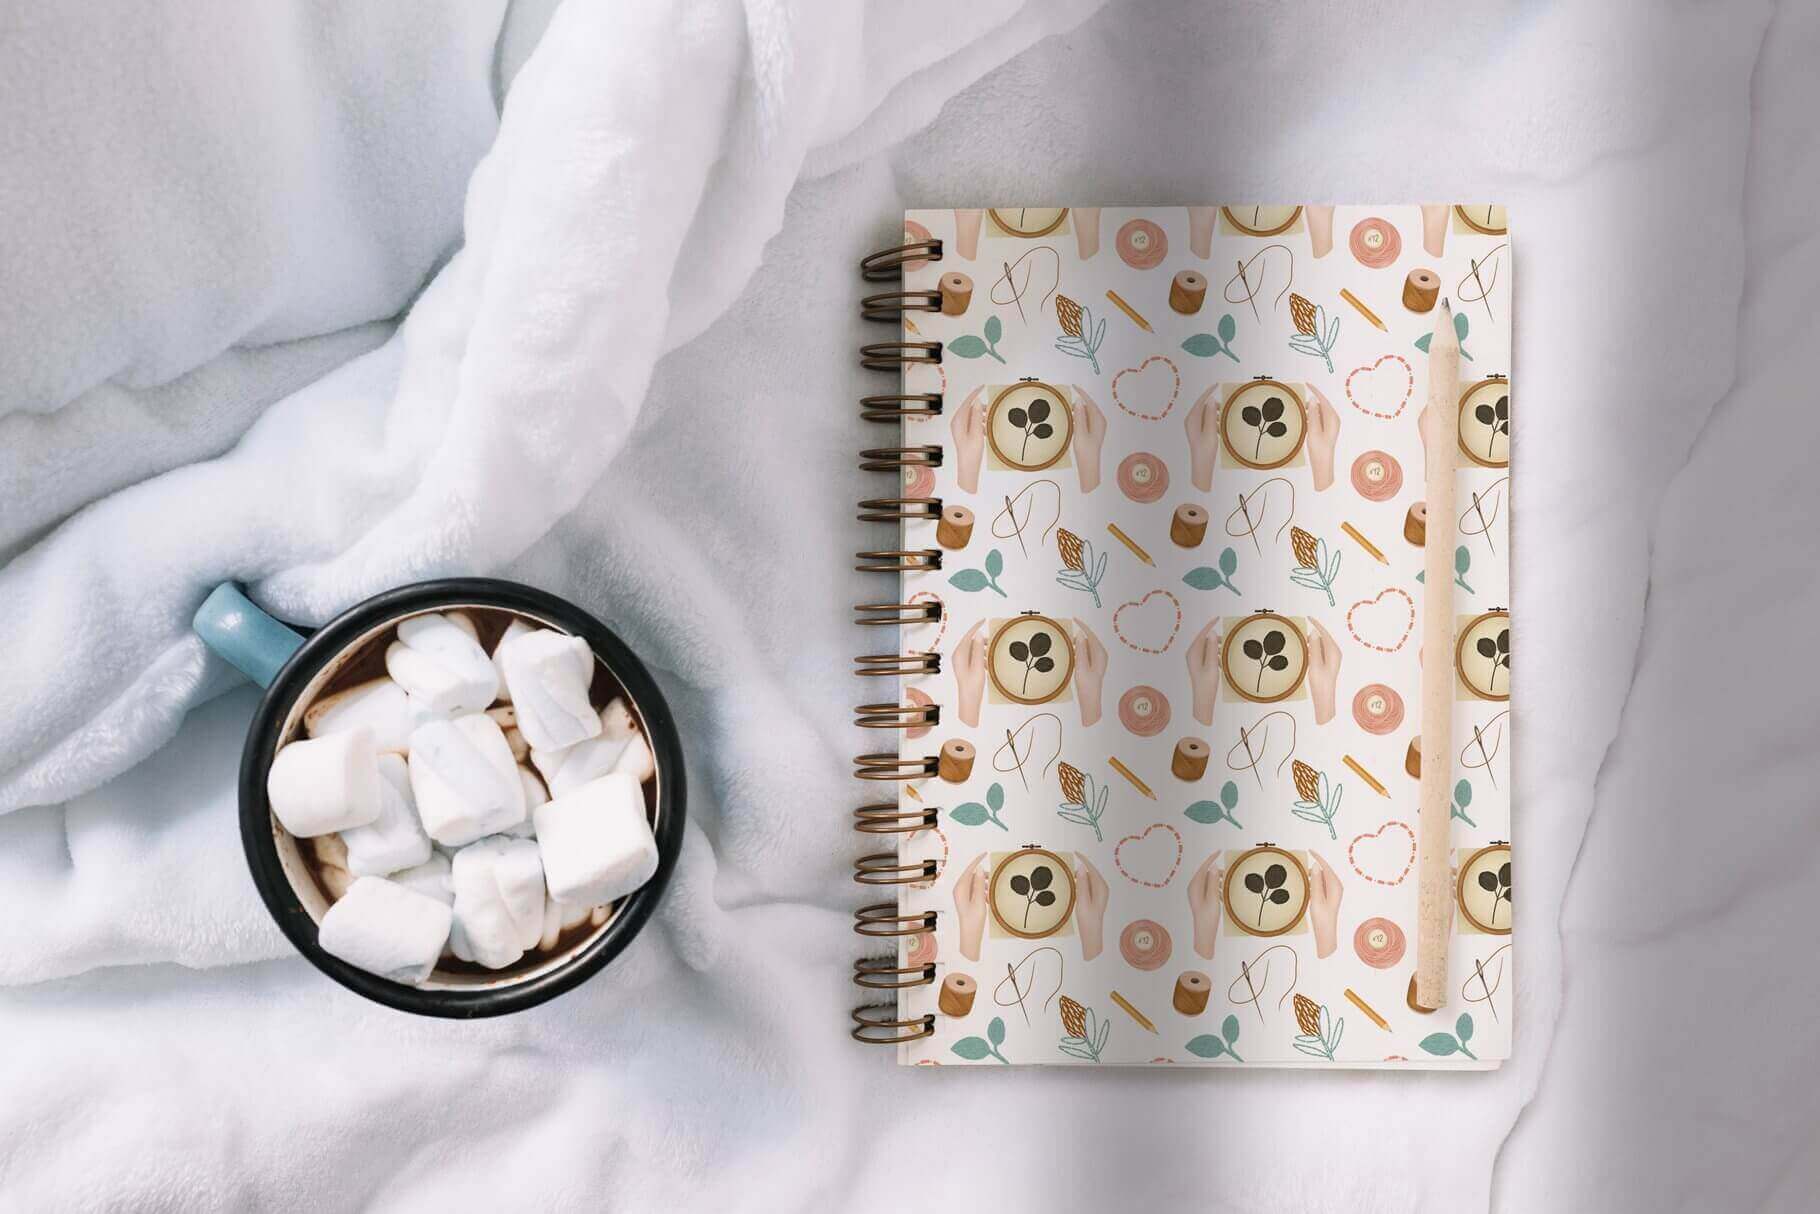 On a soft bedspread is a cup of marshmallows and a notebook with a handicraft print.